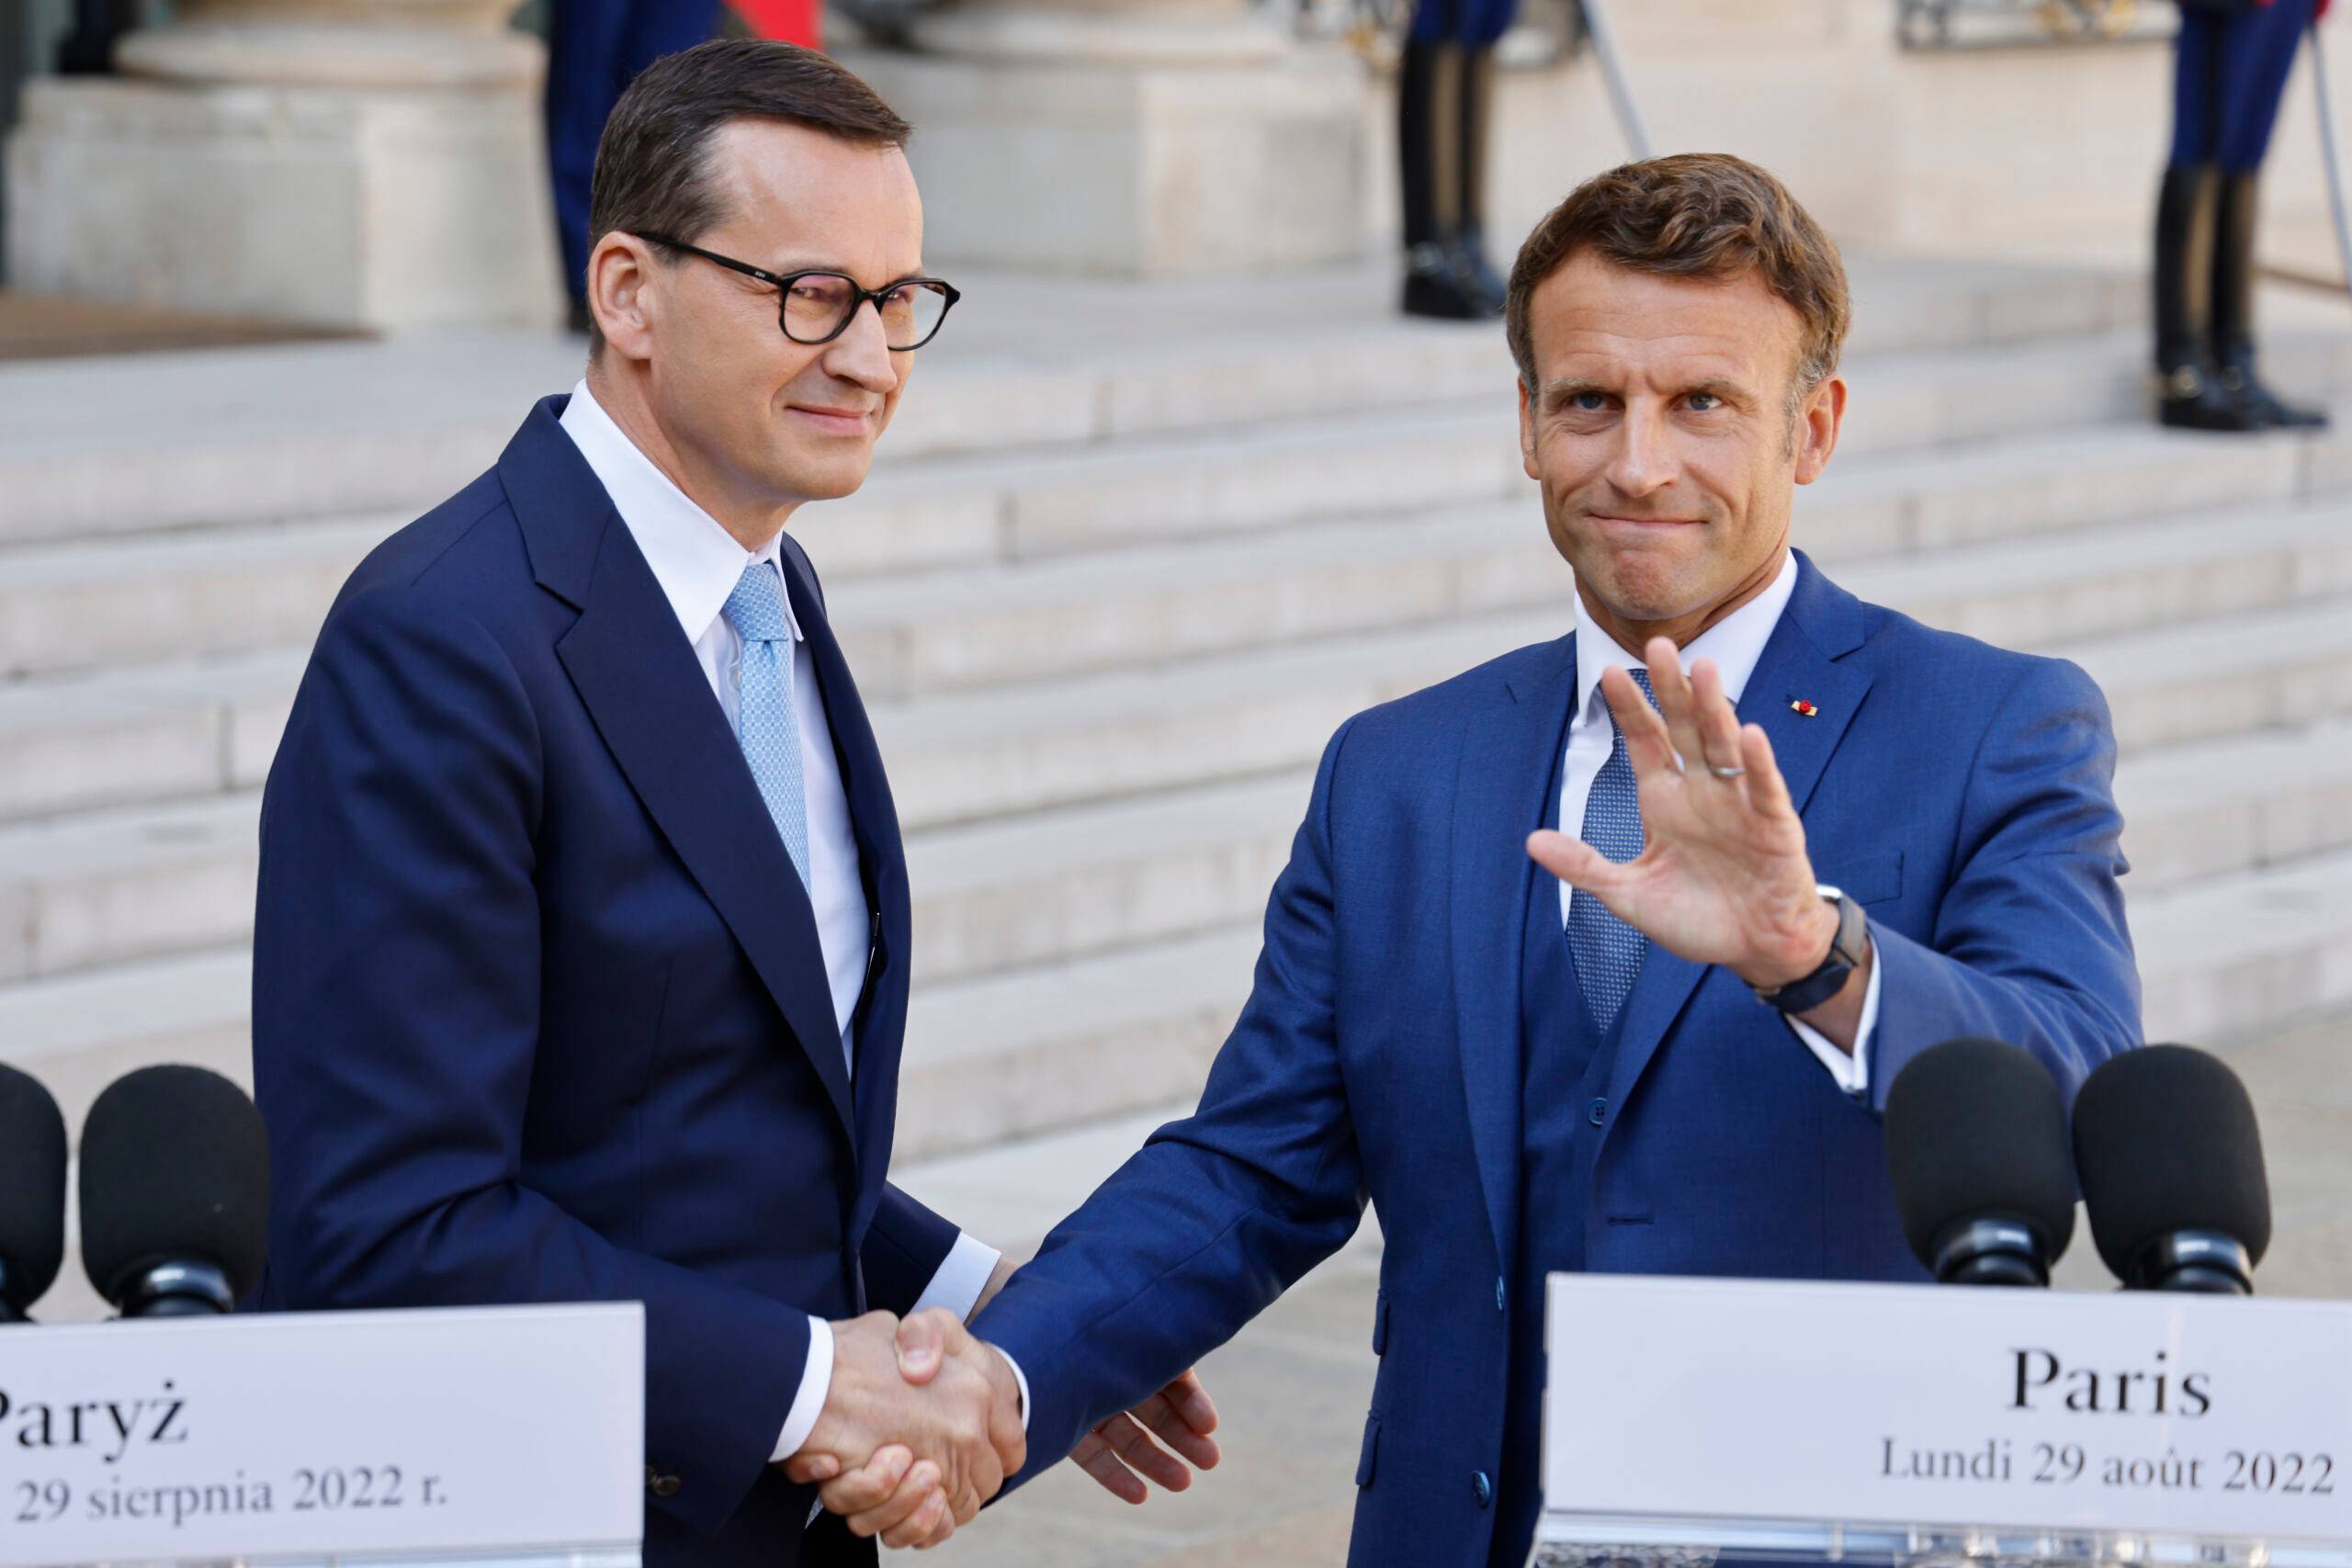 French President Emmanuel Macron (R) and Polish Prime Minister Mateusz Morawiecki shake hands during a press statement  prior to their meeting at the Elysee Palace in Paris on August 29, 2022. (Photo by Ludovic MARIN / AFP)